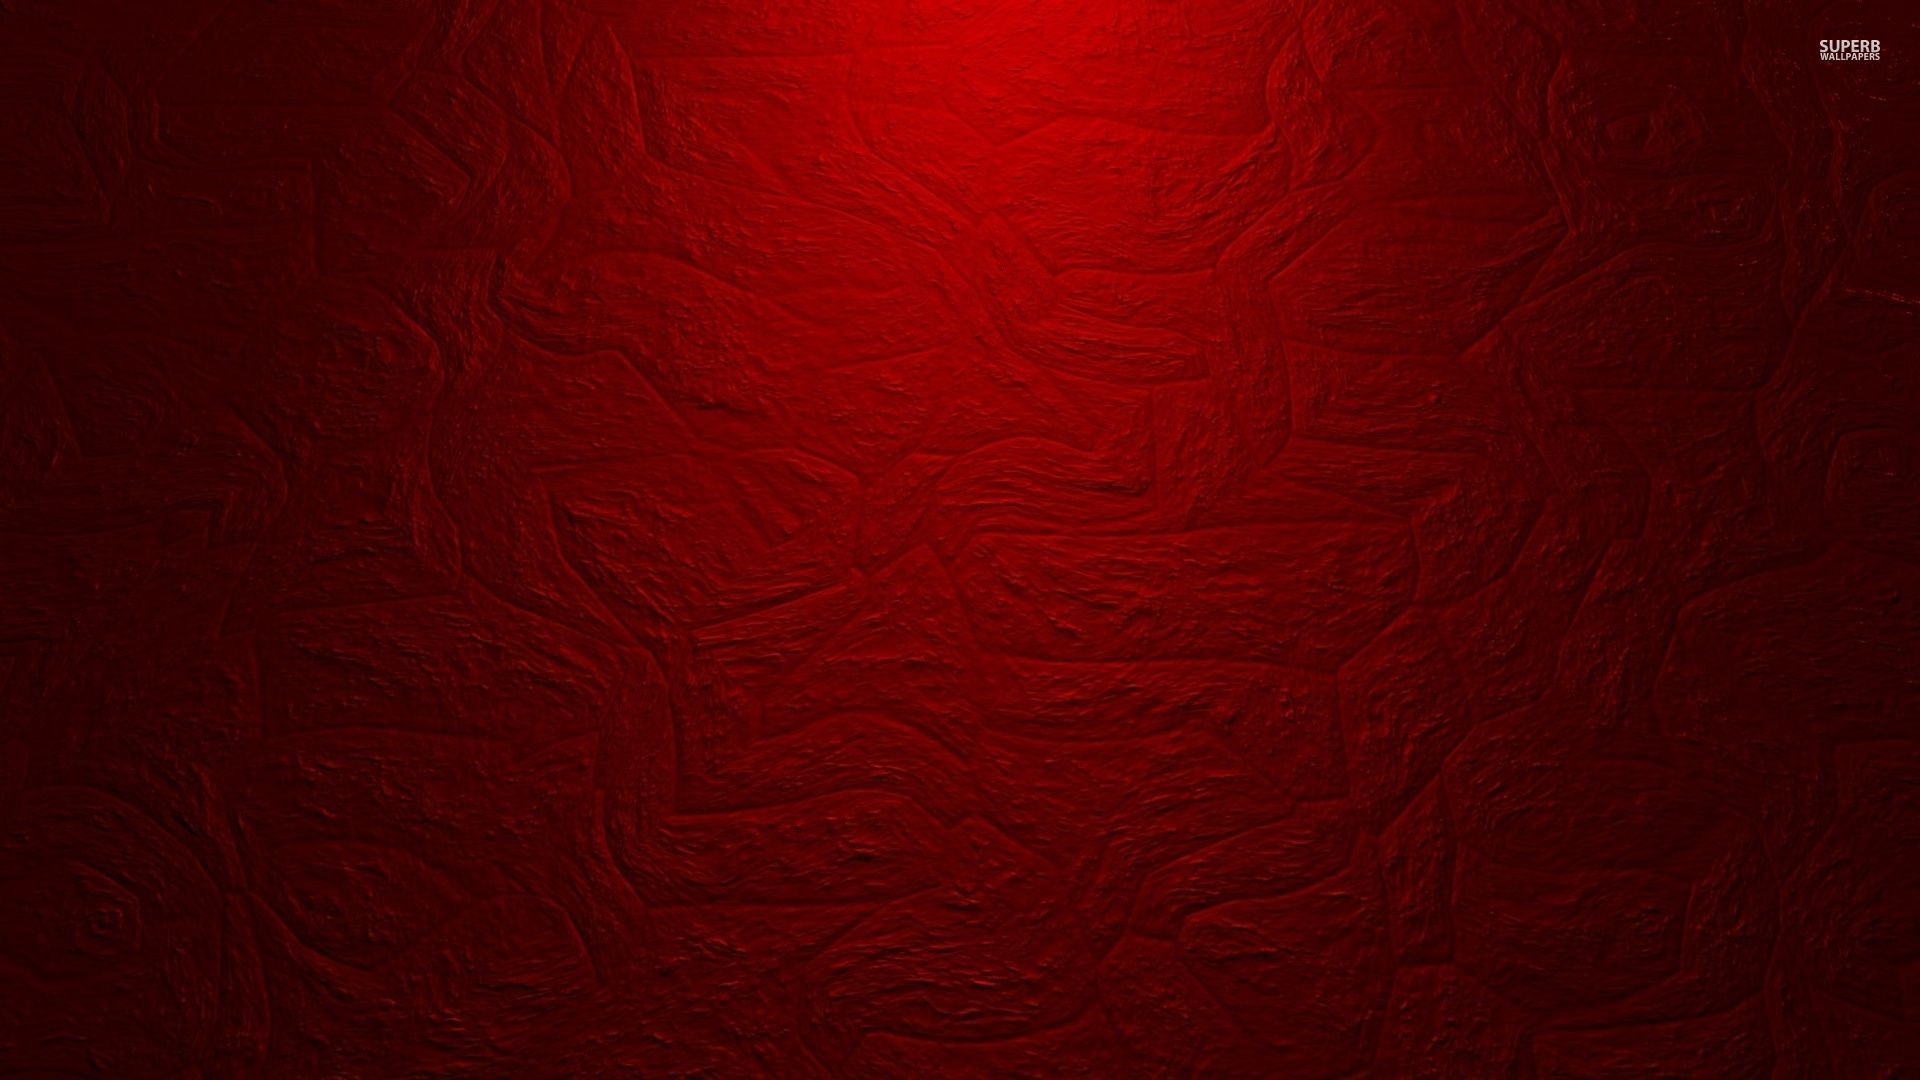 Black And Red Texture HD Wallpaper High Resolution